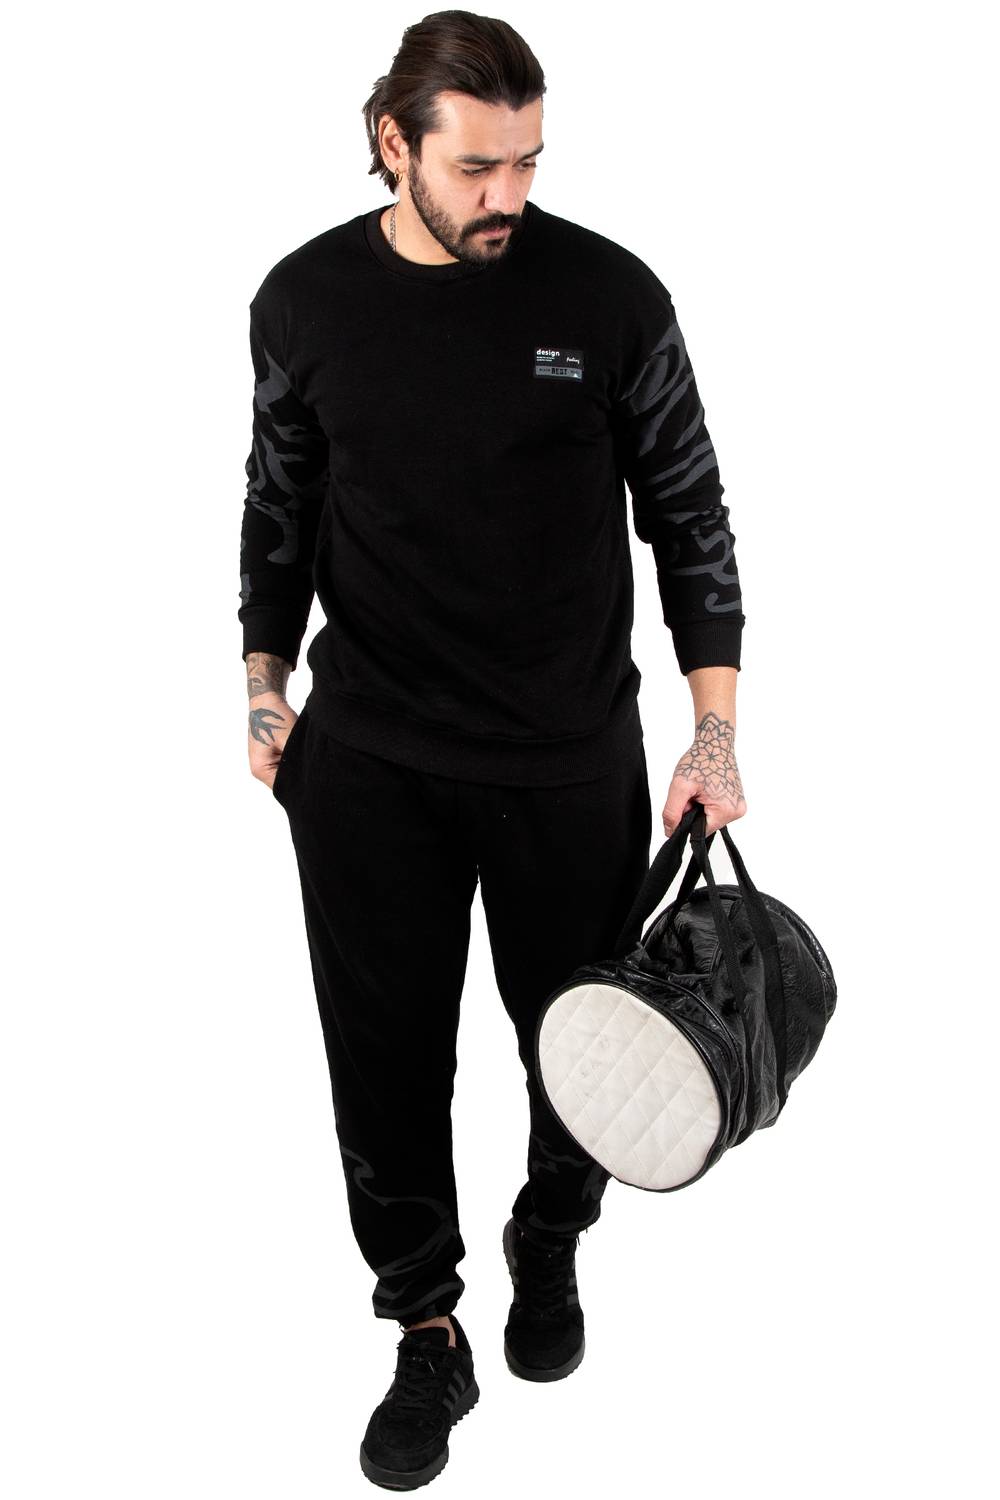 DeepSEA Crew Neck Two Thread Men's Tracksuit Set with Patterned Sleeves and Legs 2301584